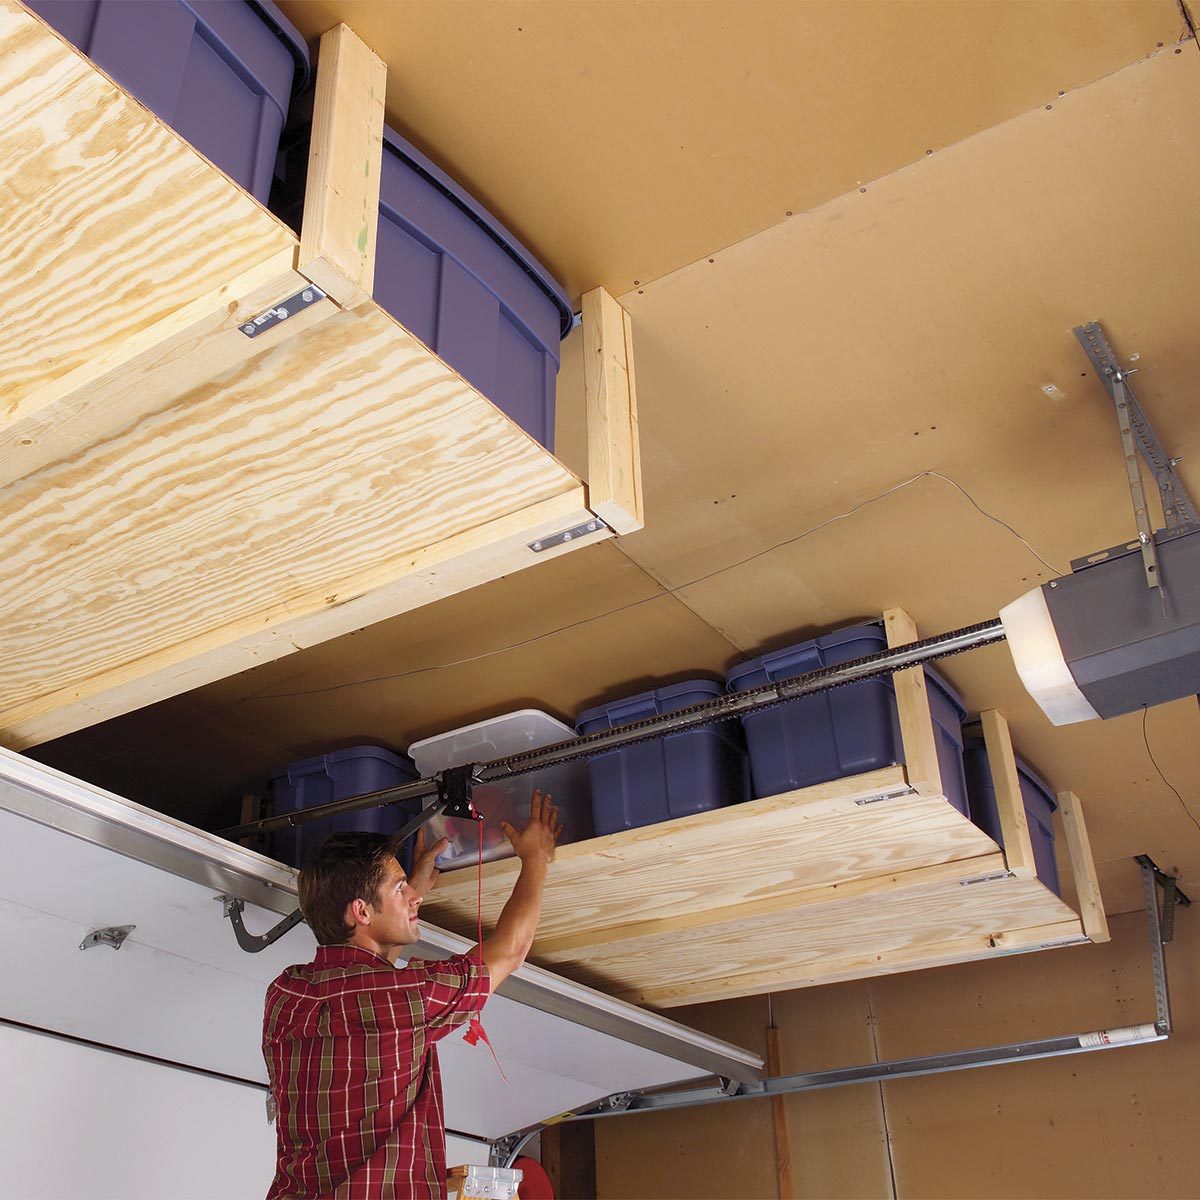 16 Cheap Garage Storage Projects You Can DIY | The Family ...